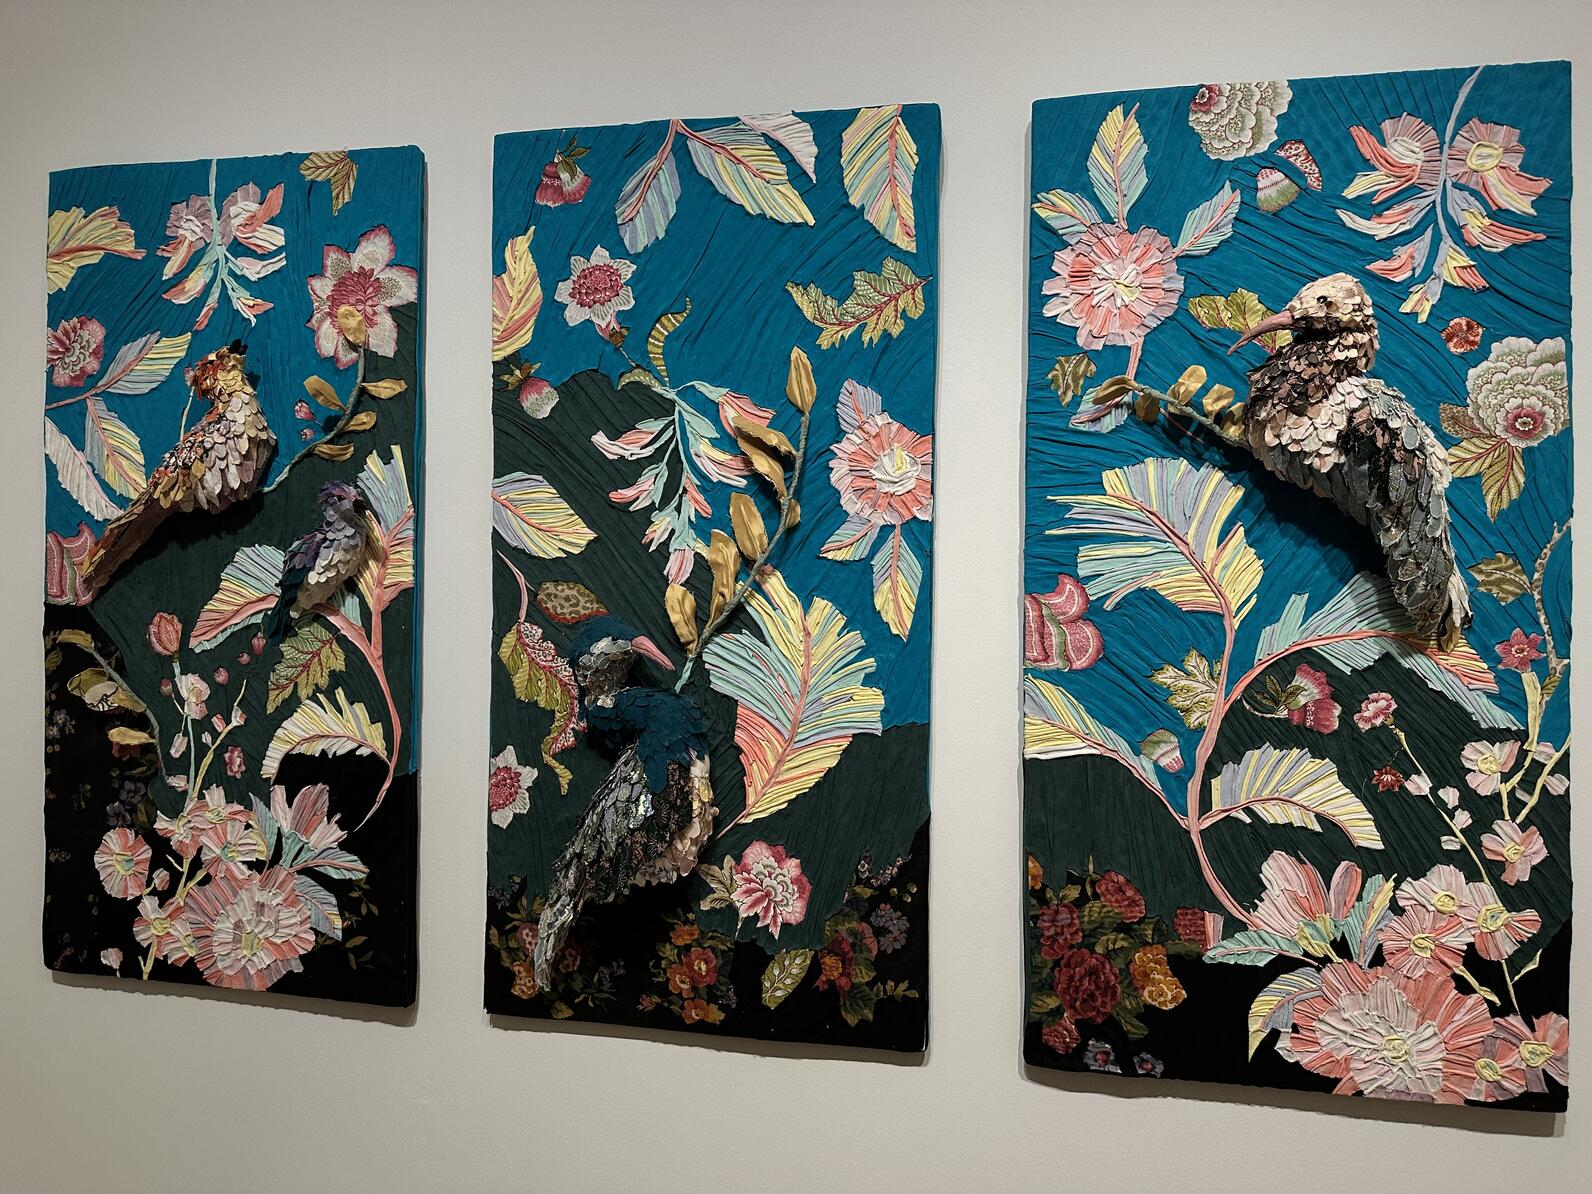 A three-panel art piece featuring birds, flowers, and leaves hung on a wall.